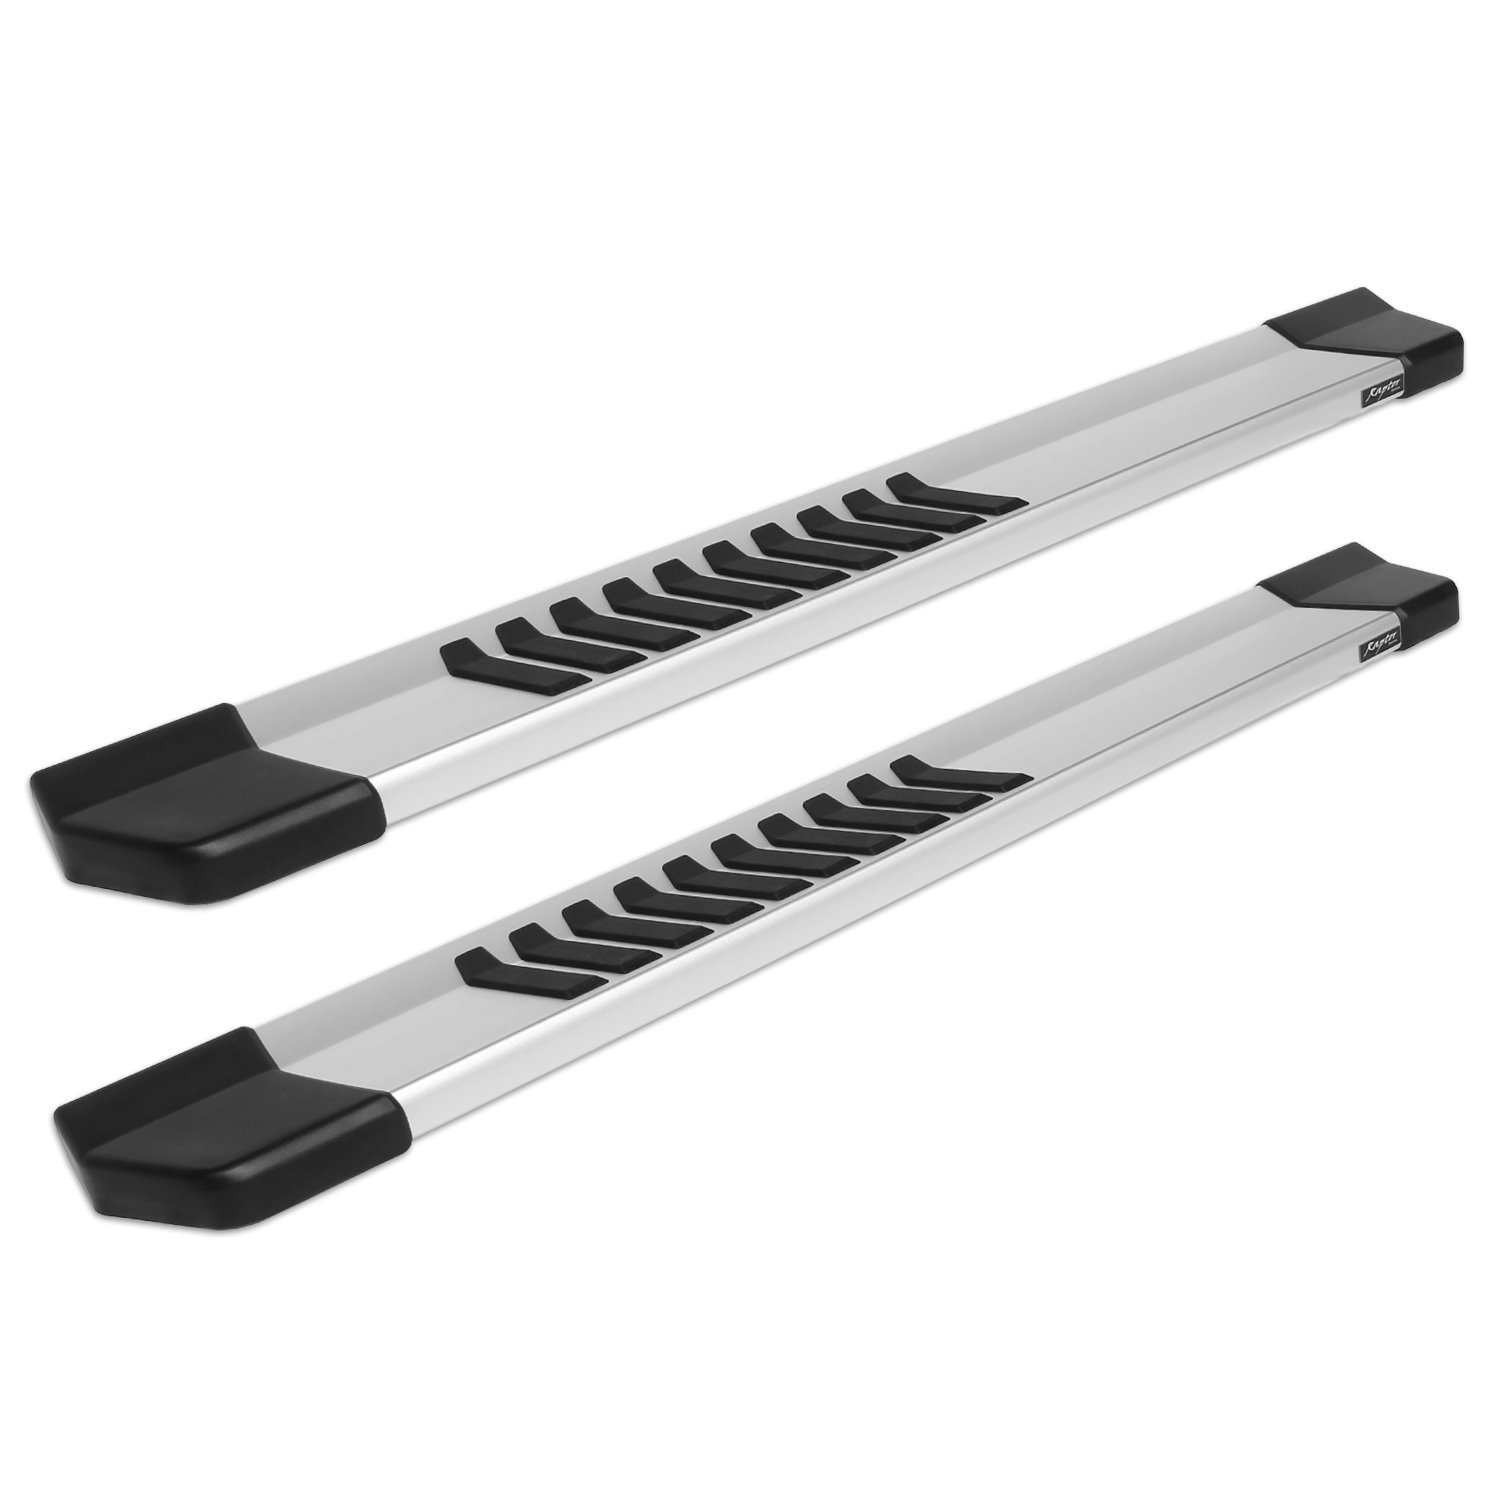 1703-0300 6 in OEM Style Slide Track Running Boards, Brushed Aluminum, 15-23 Ford F-150/F-250/F-350